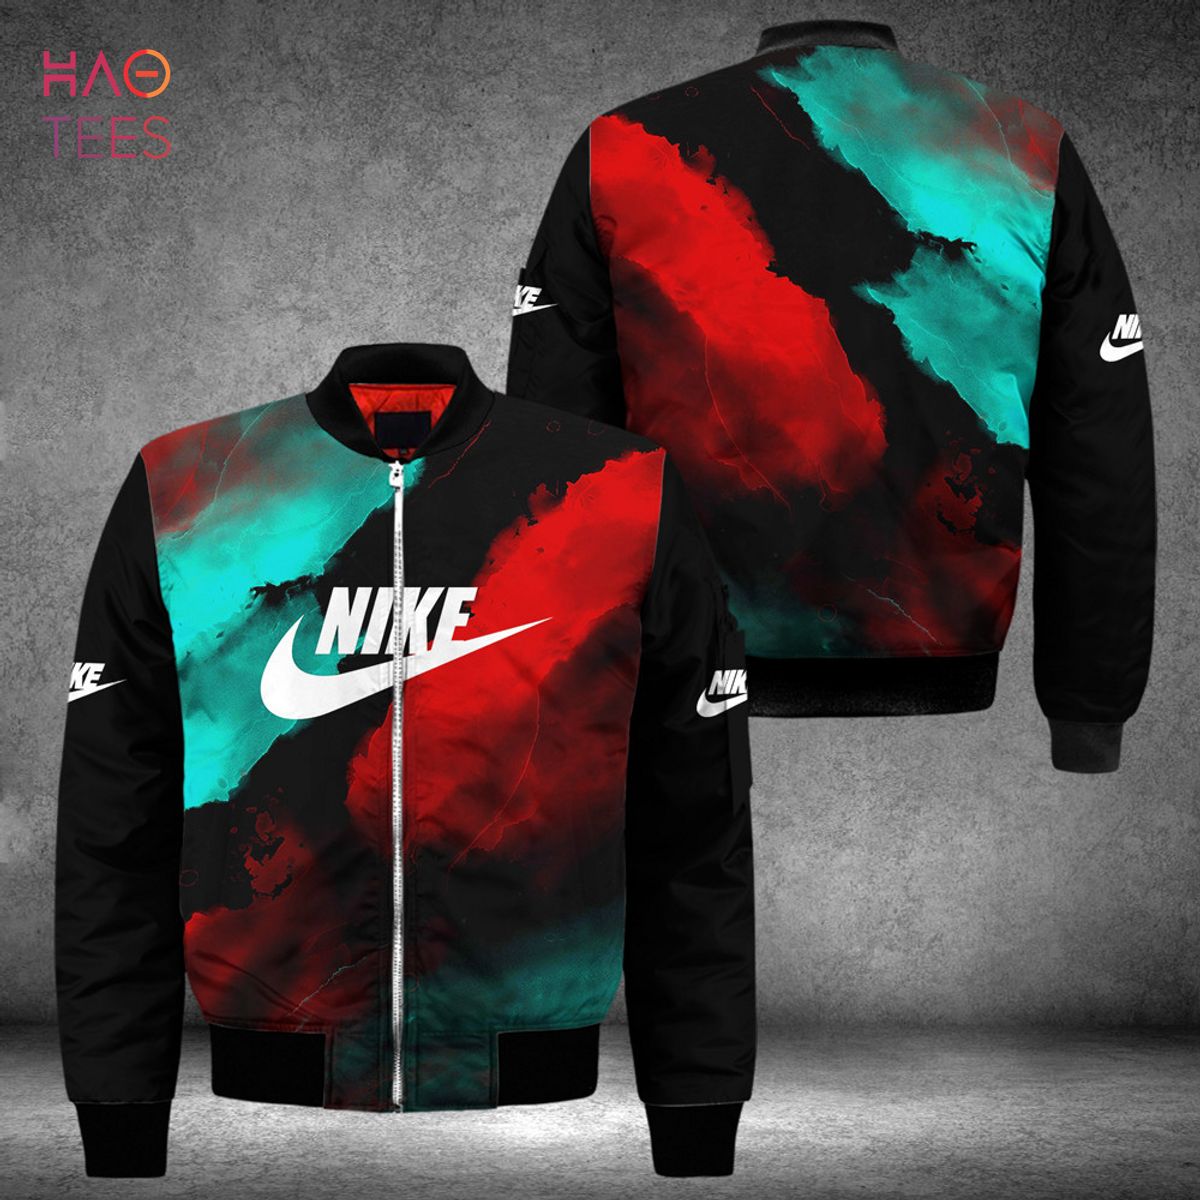 HOT Nike Luxury Brand Tie Dye Red Blue Bomber Jacket Limited Edition